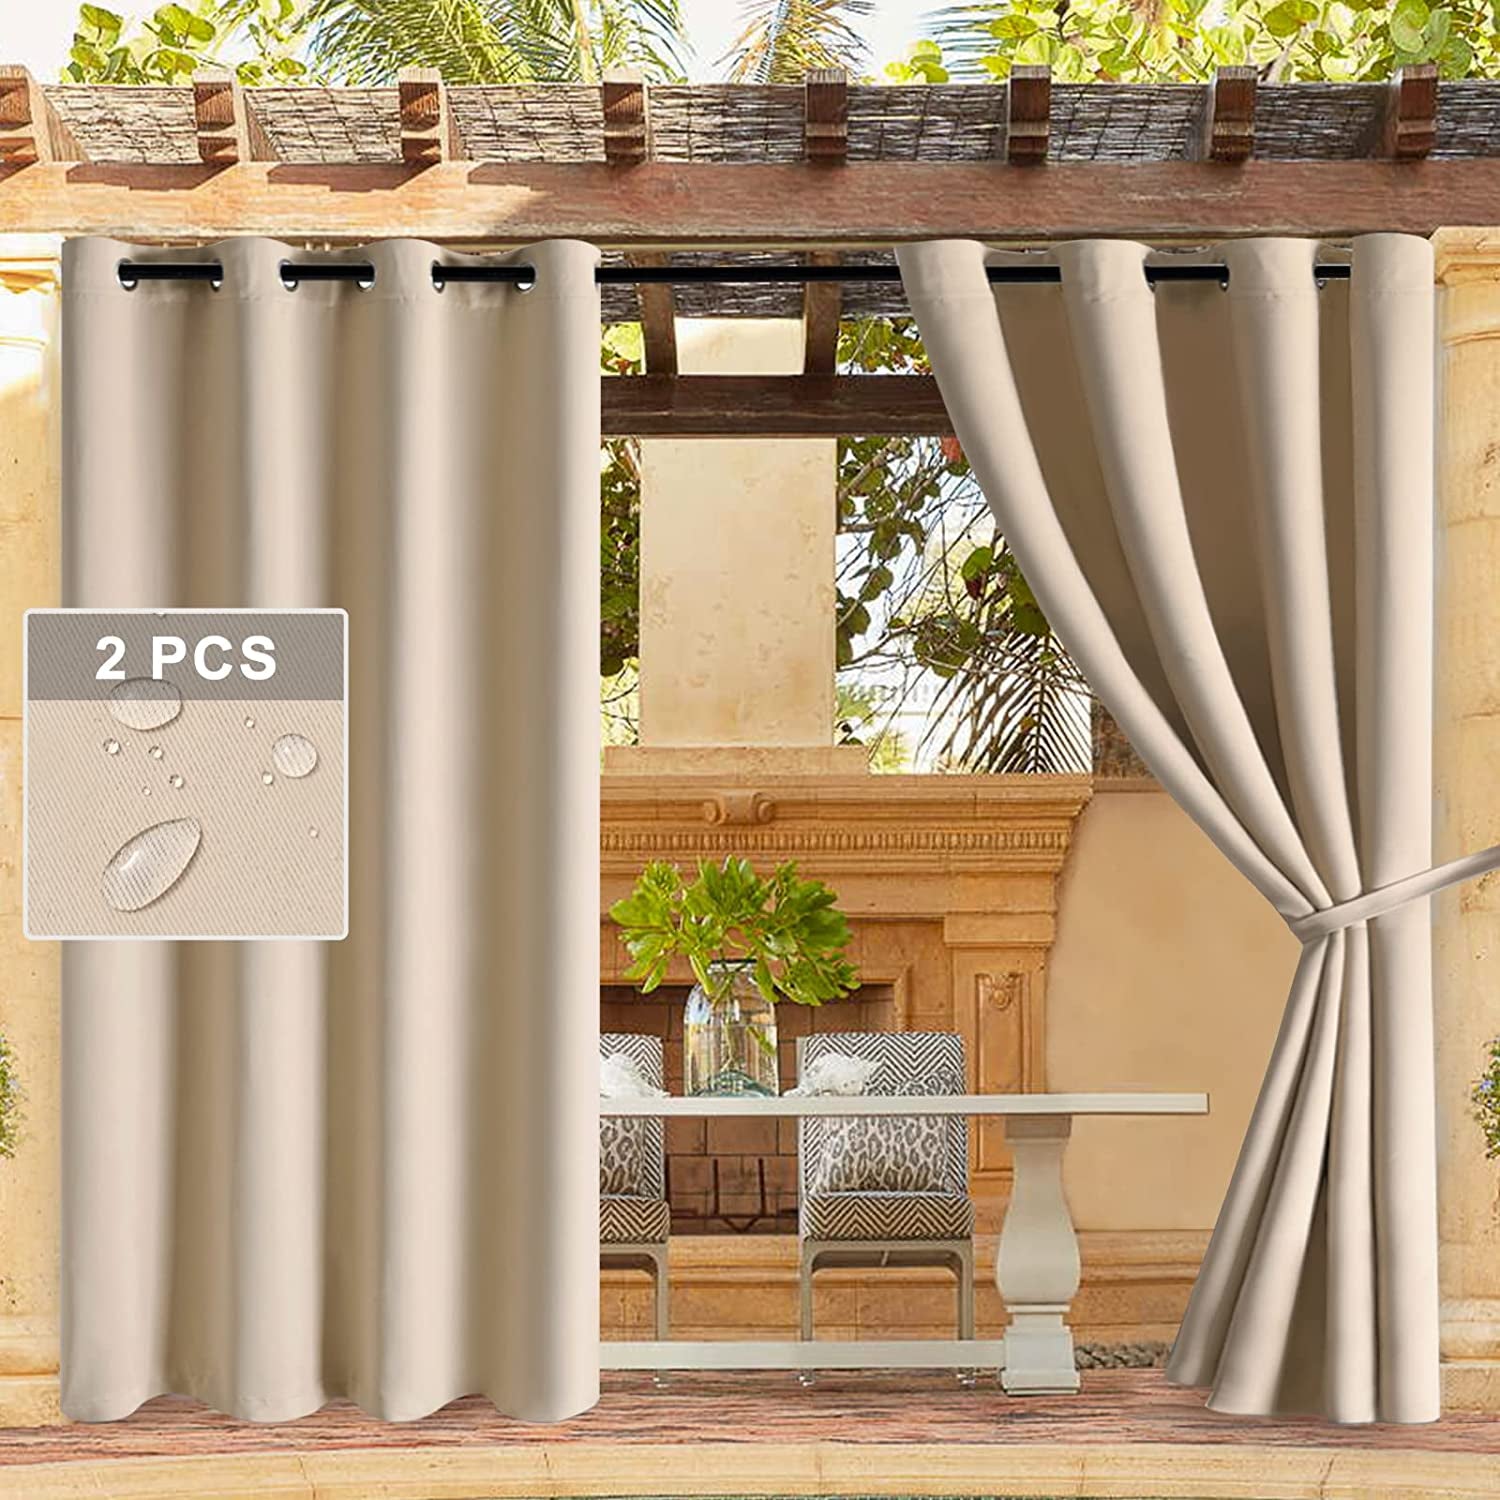 DWCN, DWCN Waterproof Outdoor Curtains for Patio -Indoor Outdoor Thermal Insulated, Sun Blocking Grommet Blackout Curtains for Bedroom, Pergola, Porch and Cabana, White, 52 X 84 Inches Long, 2 Panels